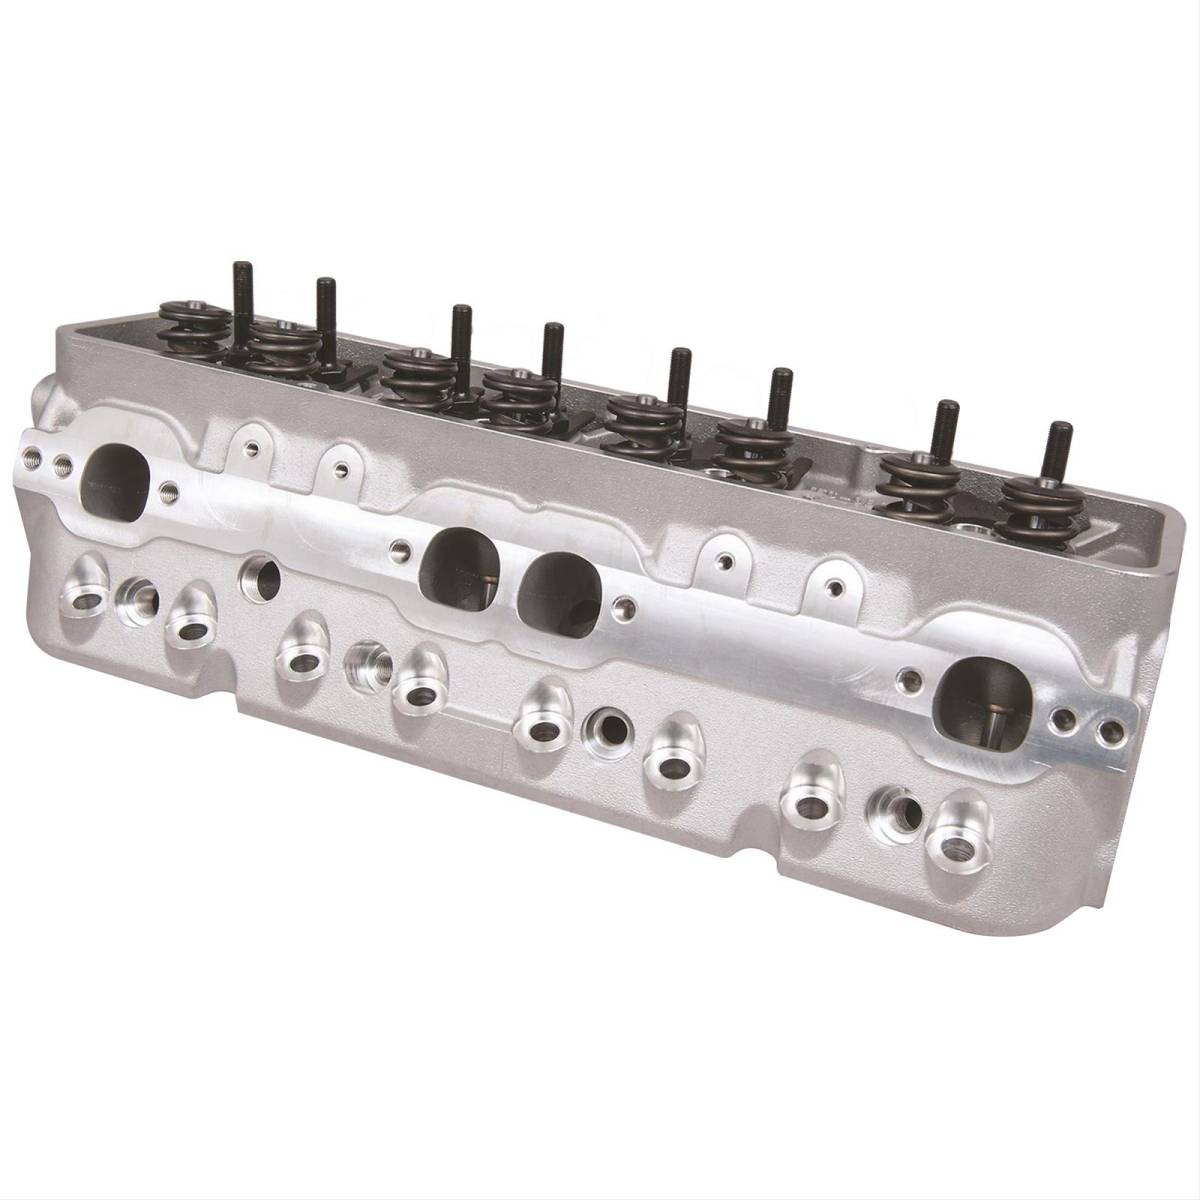 Trickflow - Trickflow Super 23 Cylinder Heads SBC 195cc Intake, 62cc Chambers, 1.470" Springs, Perimeter Bolt - Image 1